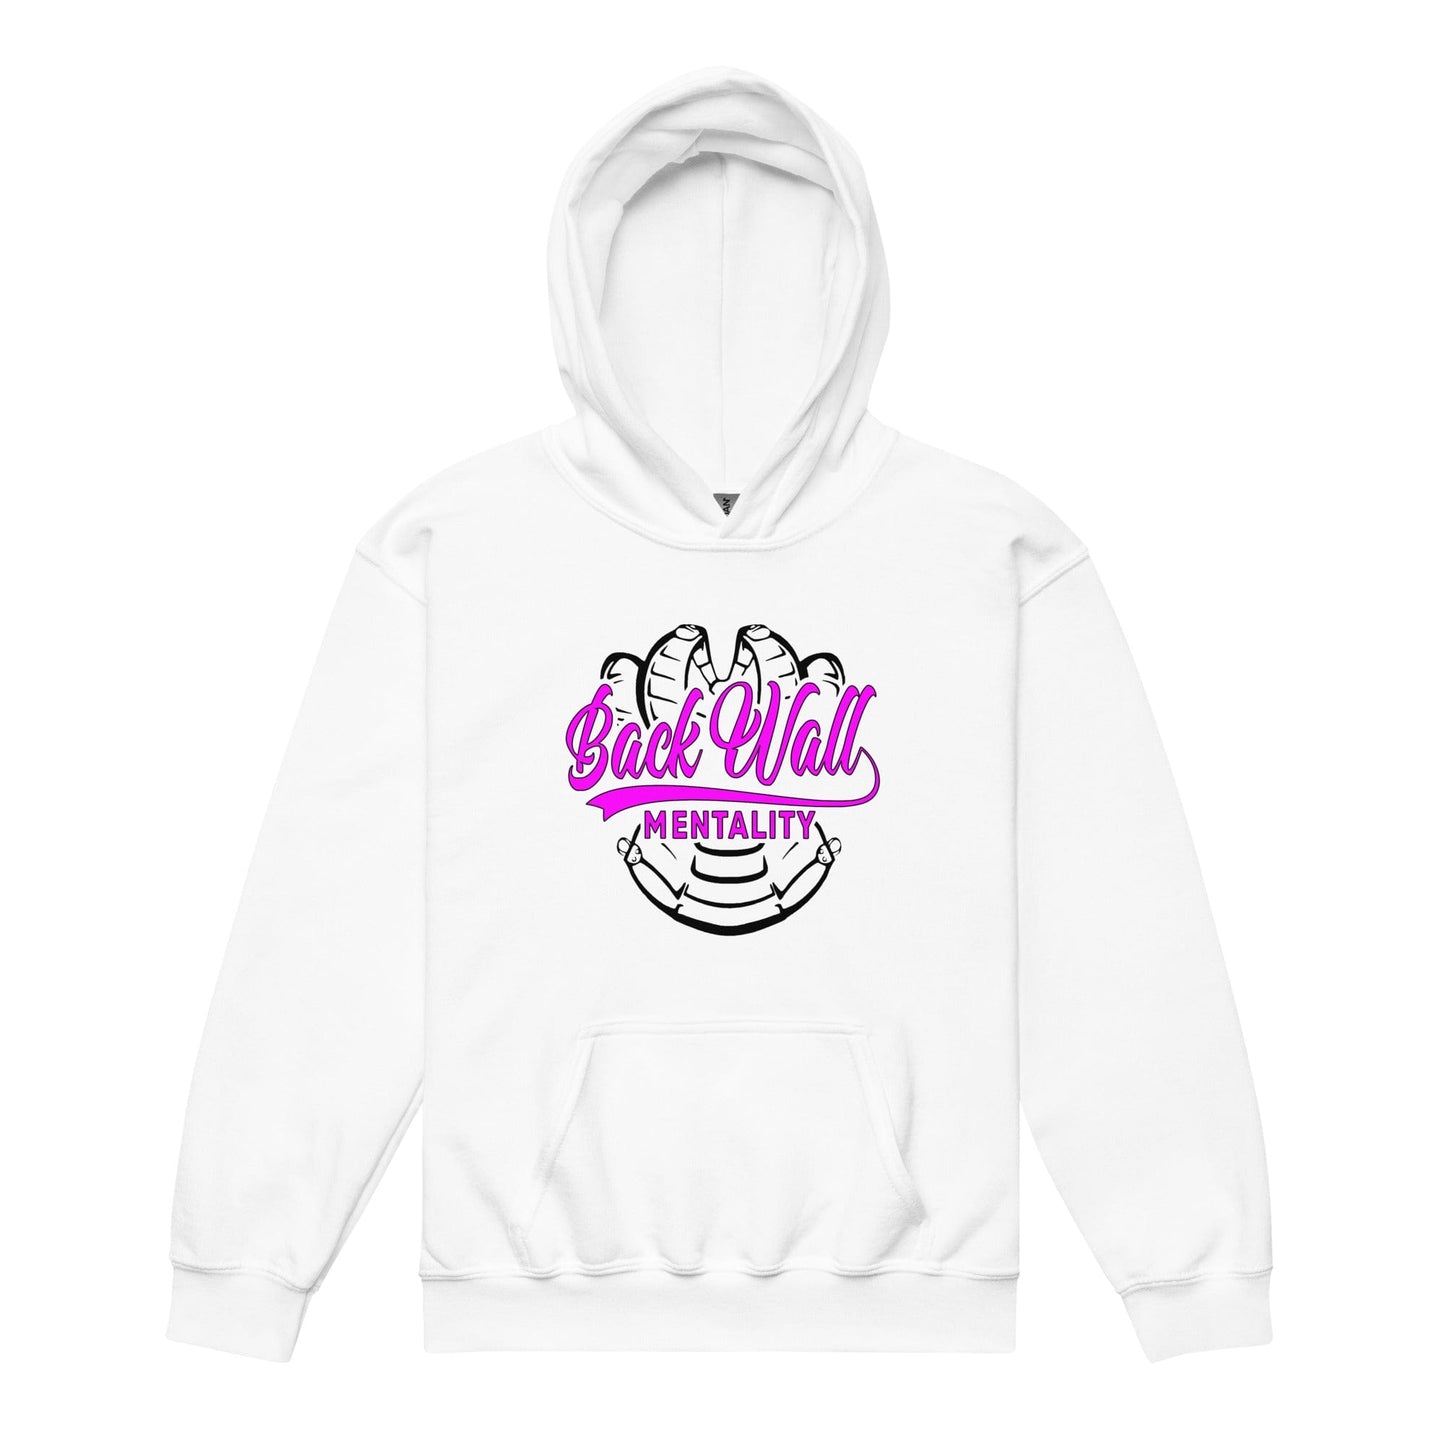 Backwall Mentality Pink - Youth Hoodie